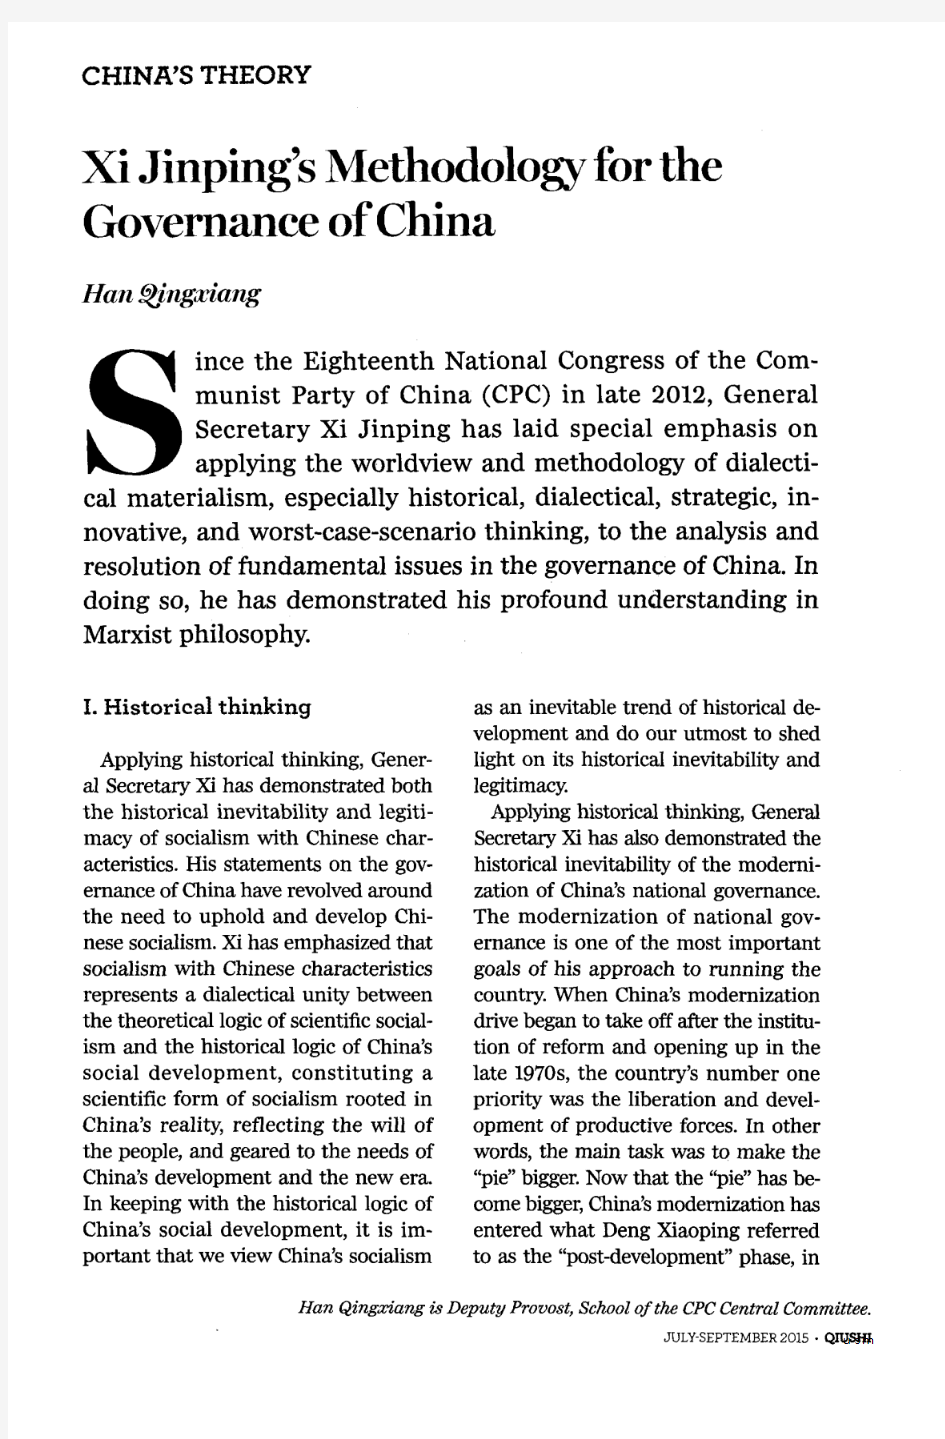 Xi Jinping's Methodology for the Governance of China-论文